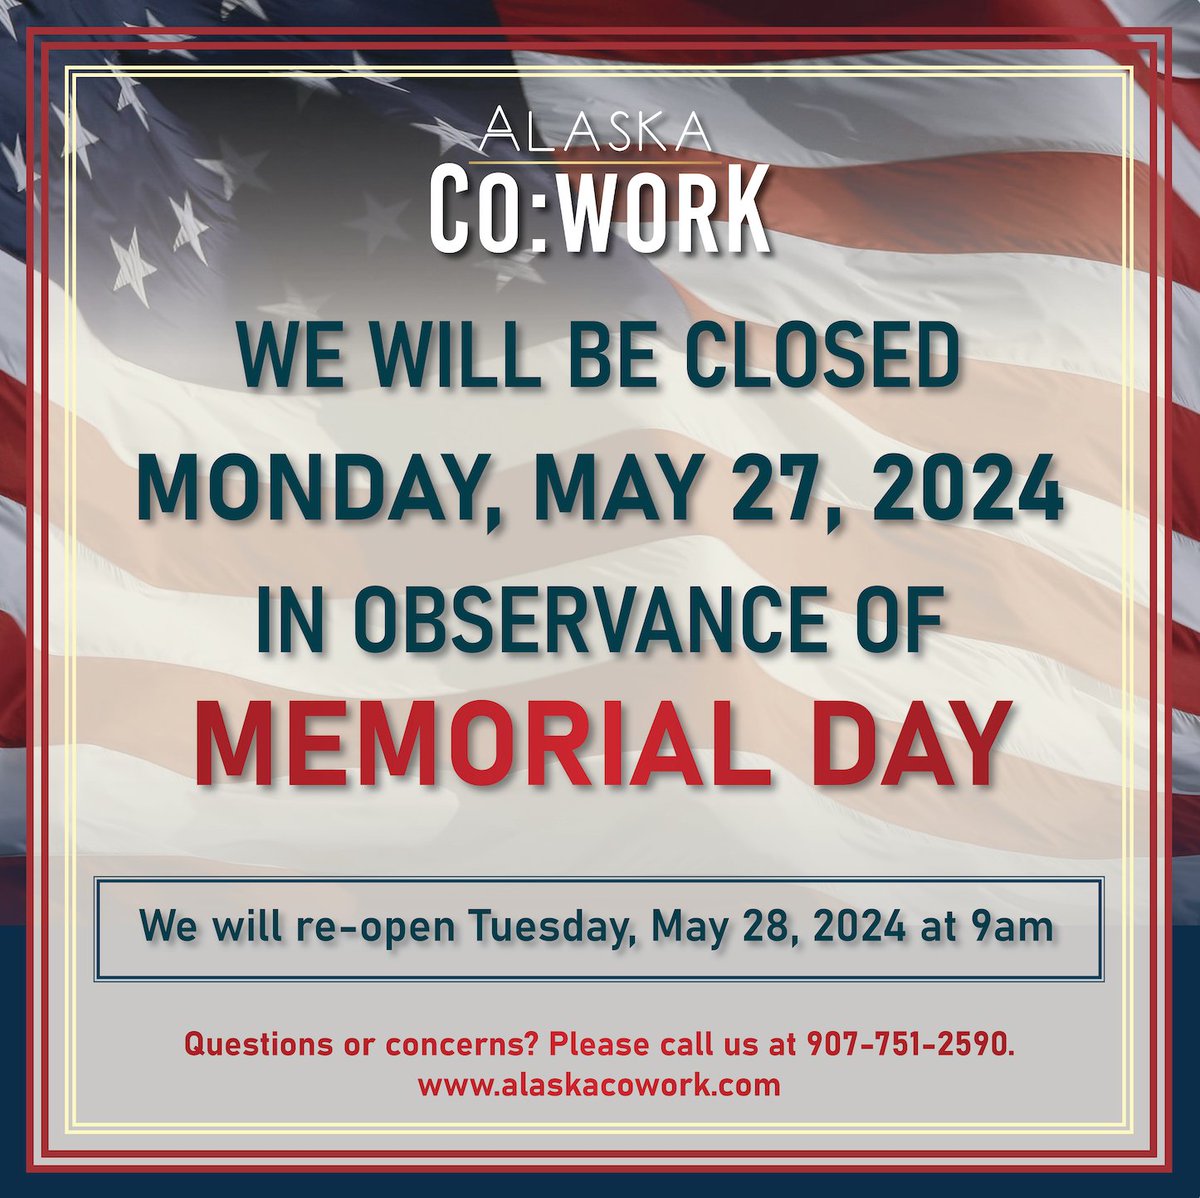 We will be CLOSED on May 27th for Memorial Day! If you need to reserve space on this day, please contact our office prior to set things up at (907) 751-2590.
.
.
.
#alaskacowork #memorialday🇺🇸 #coworkingcommunity #officespace #officespaces #coworkingspace #coworkingspaces